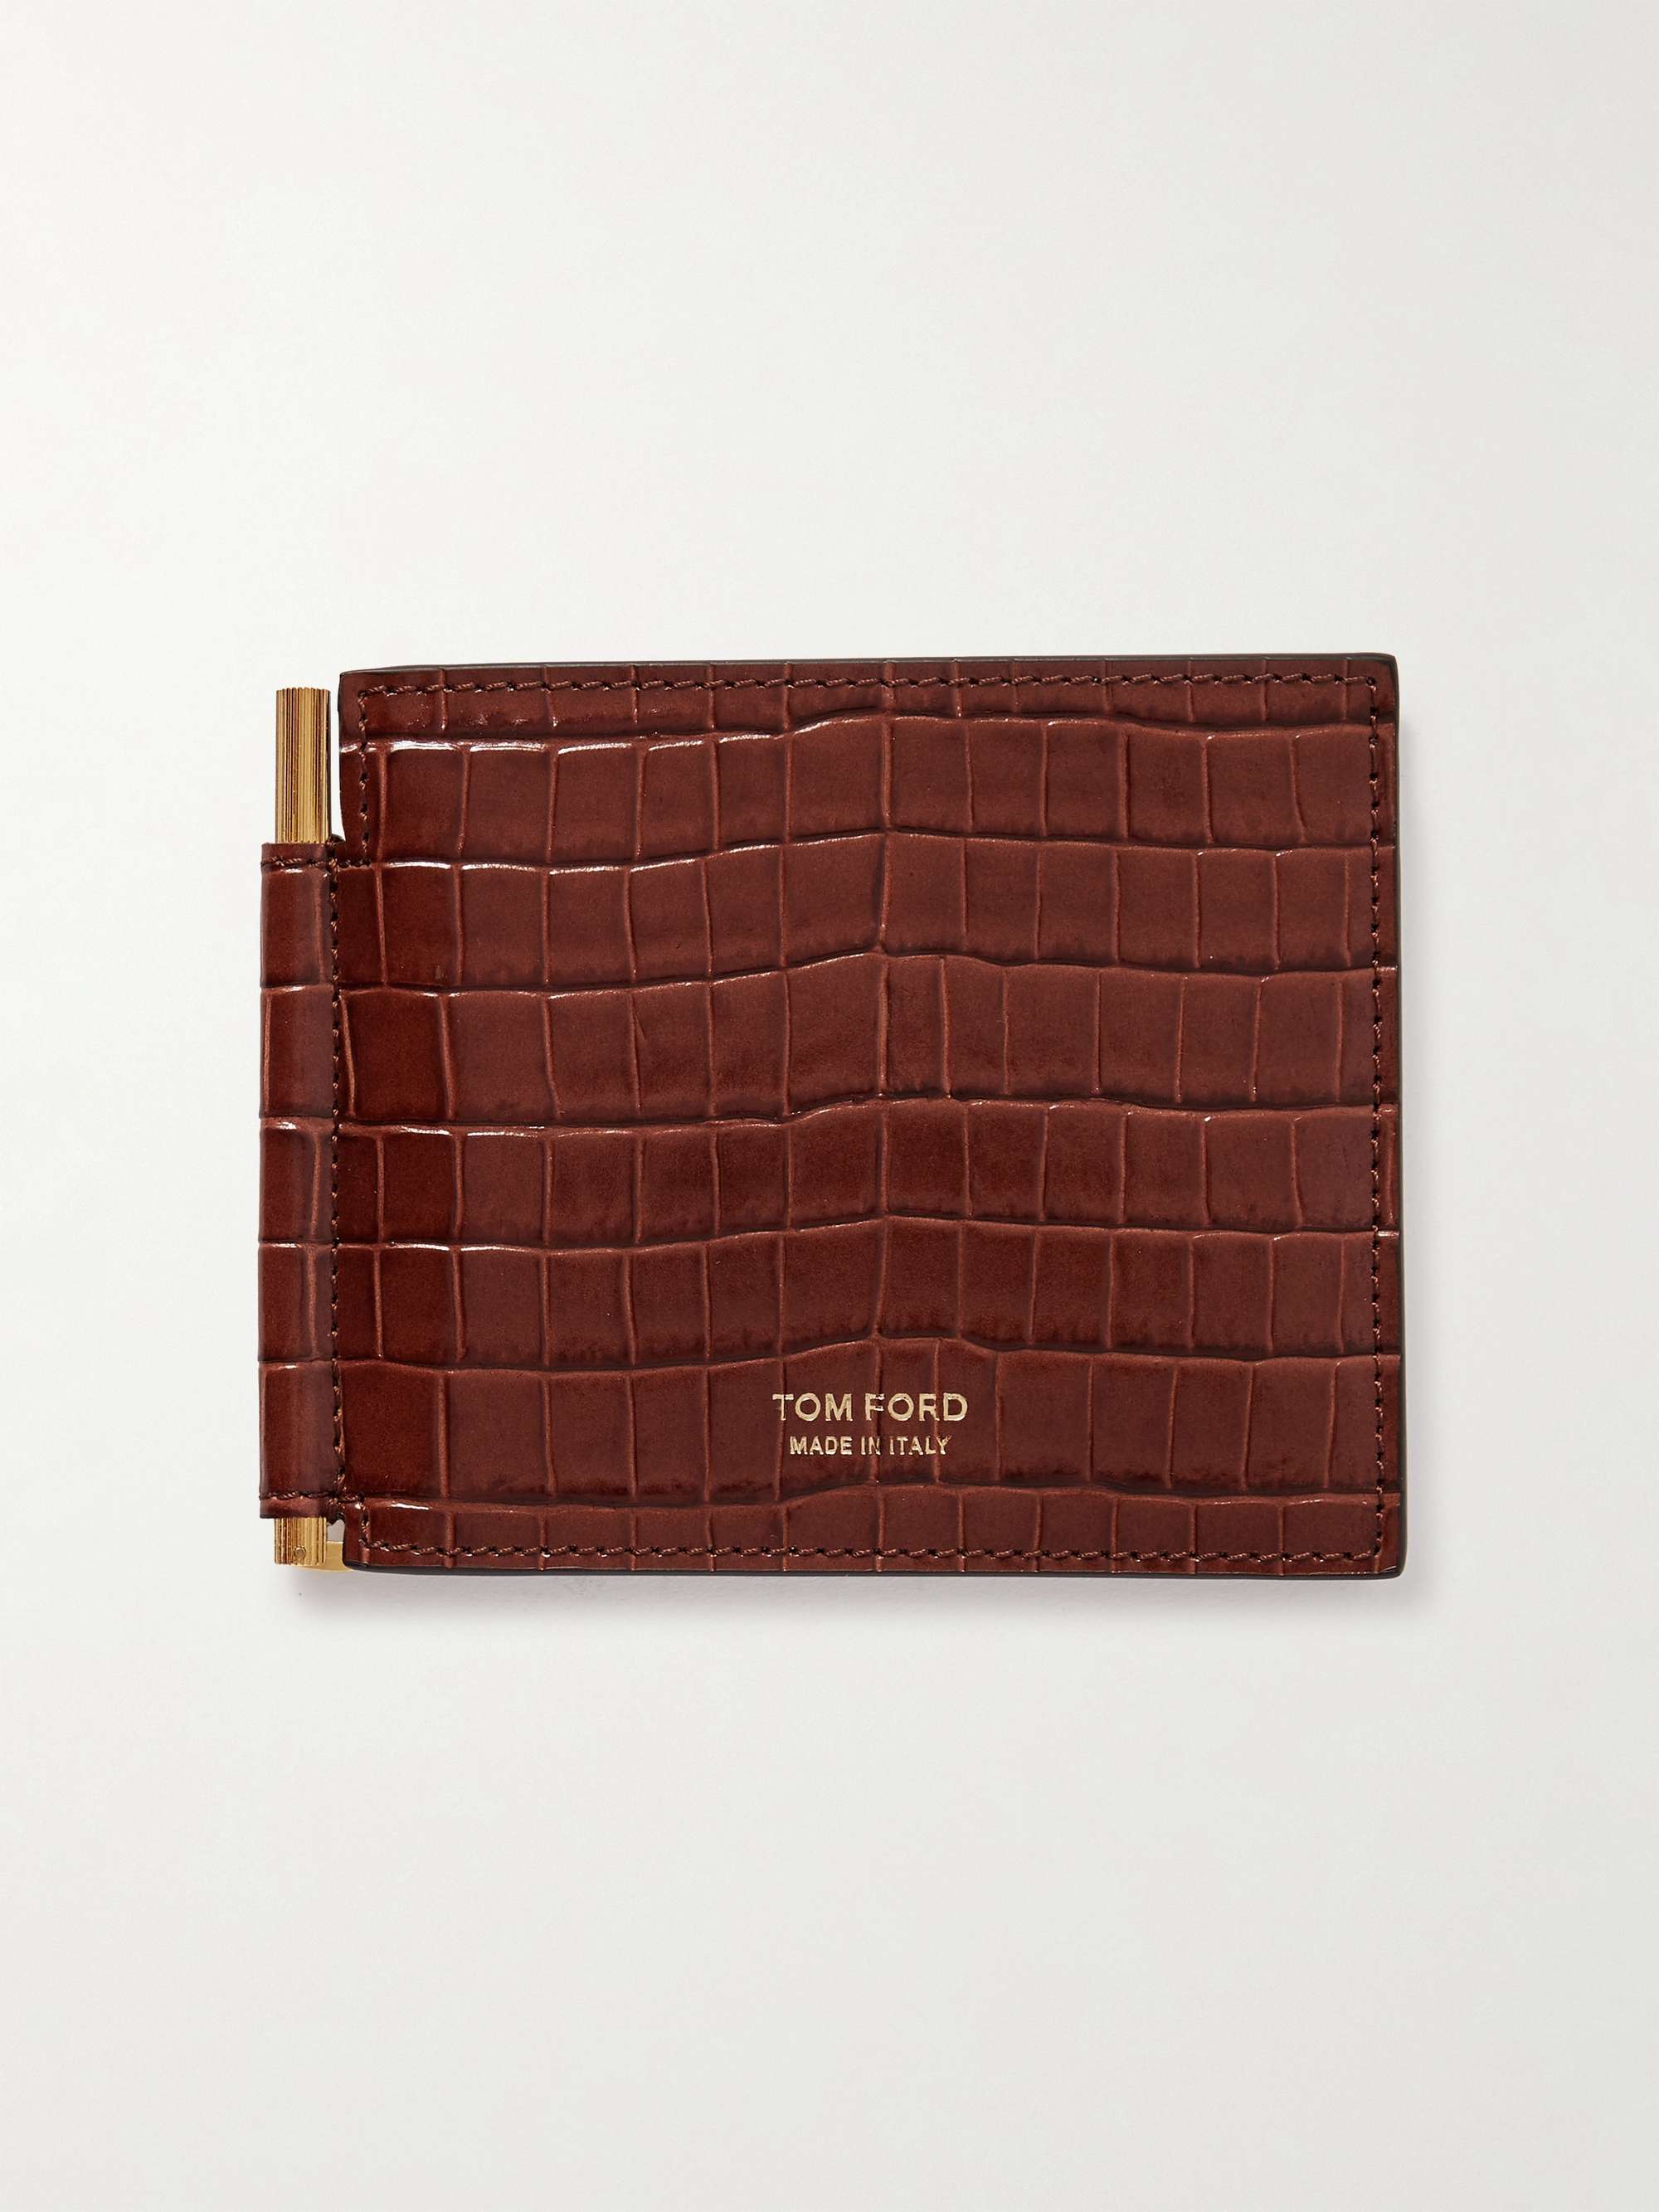 TOM FORD Croc-Effect Leather Bifold Wallet with Money Clip